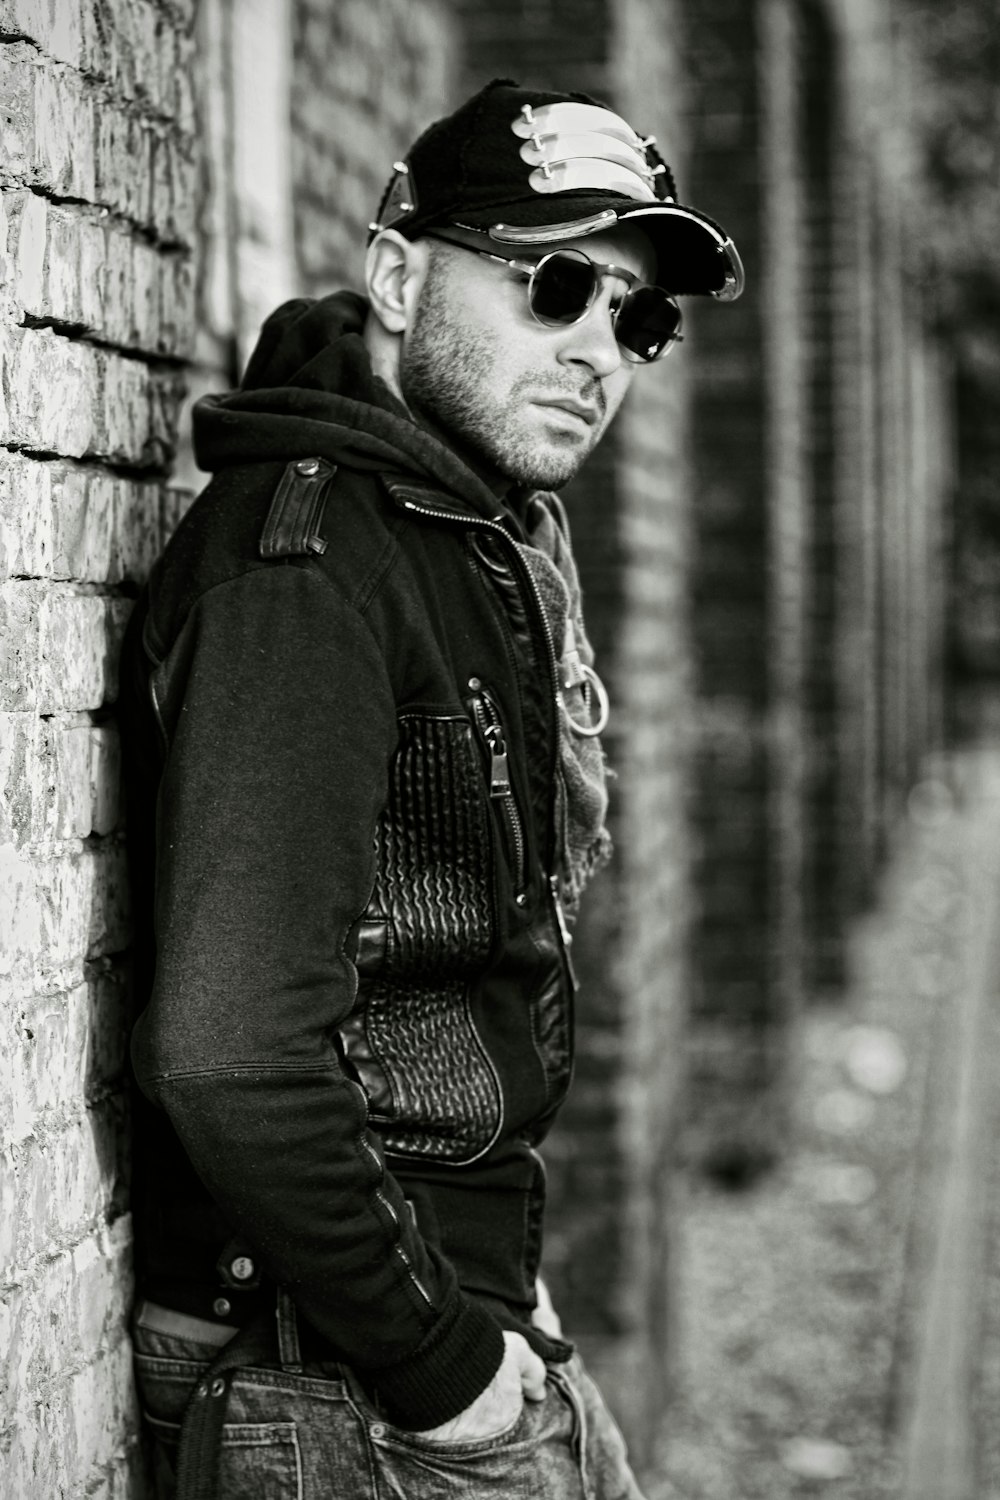 a man leaning against a brick wall wearing sunglasses